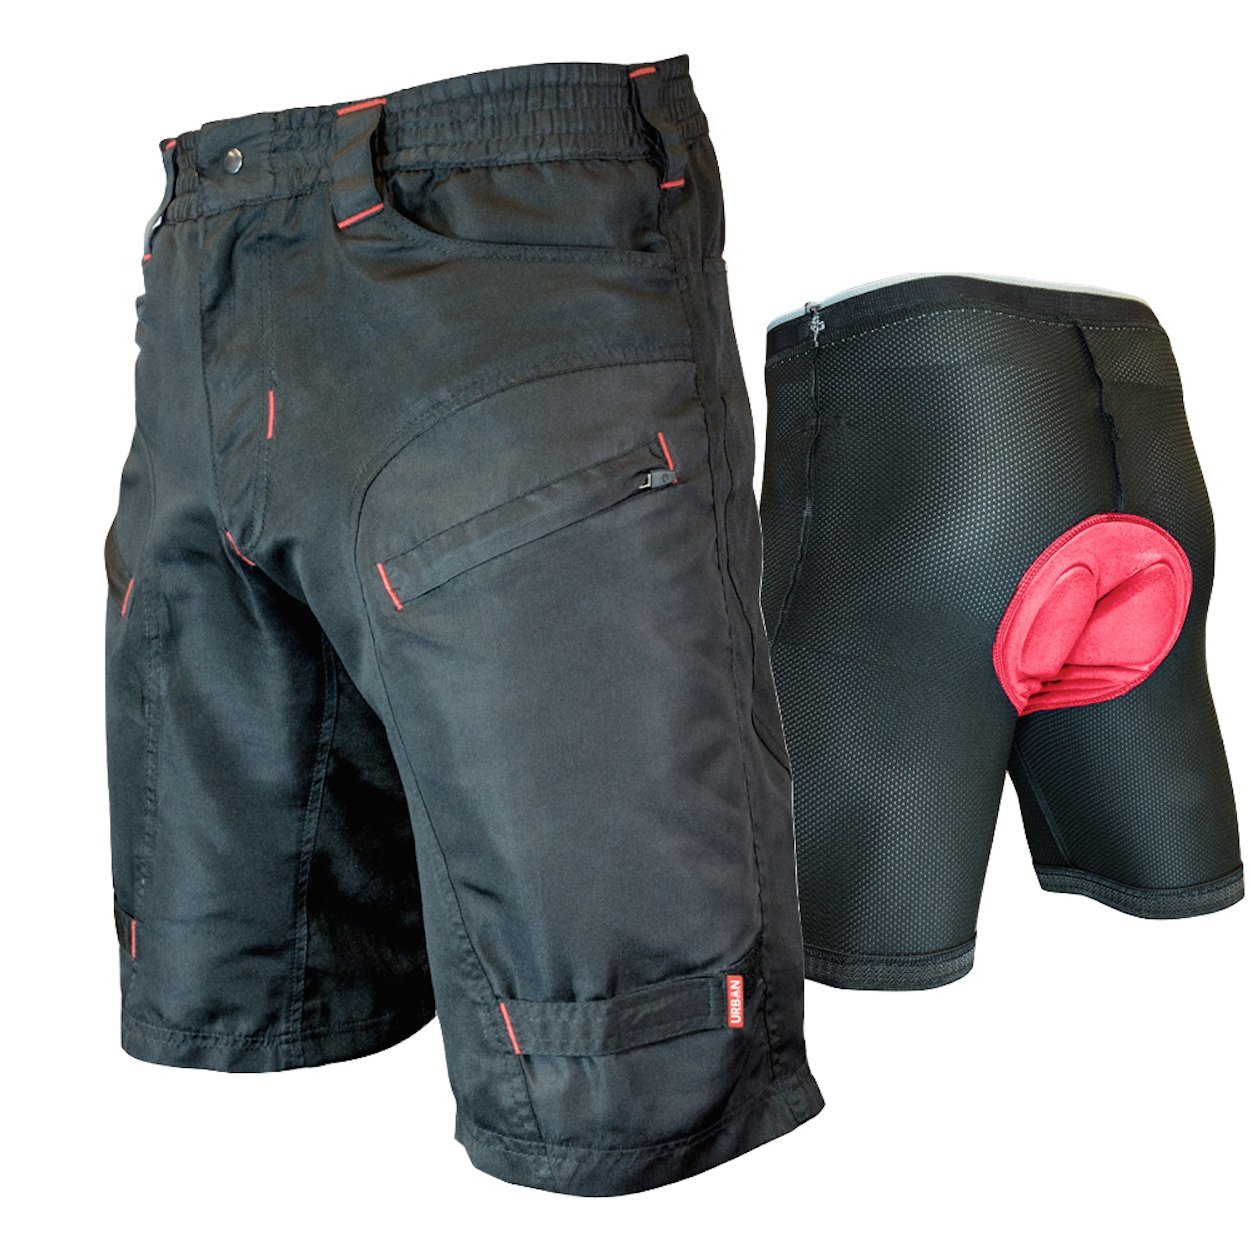 Youth Single Tracker, Kids Mountain Bike Shorts with Padded Underliner